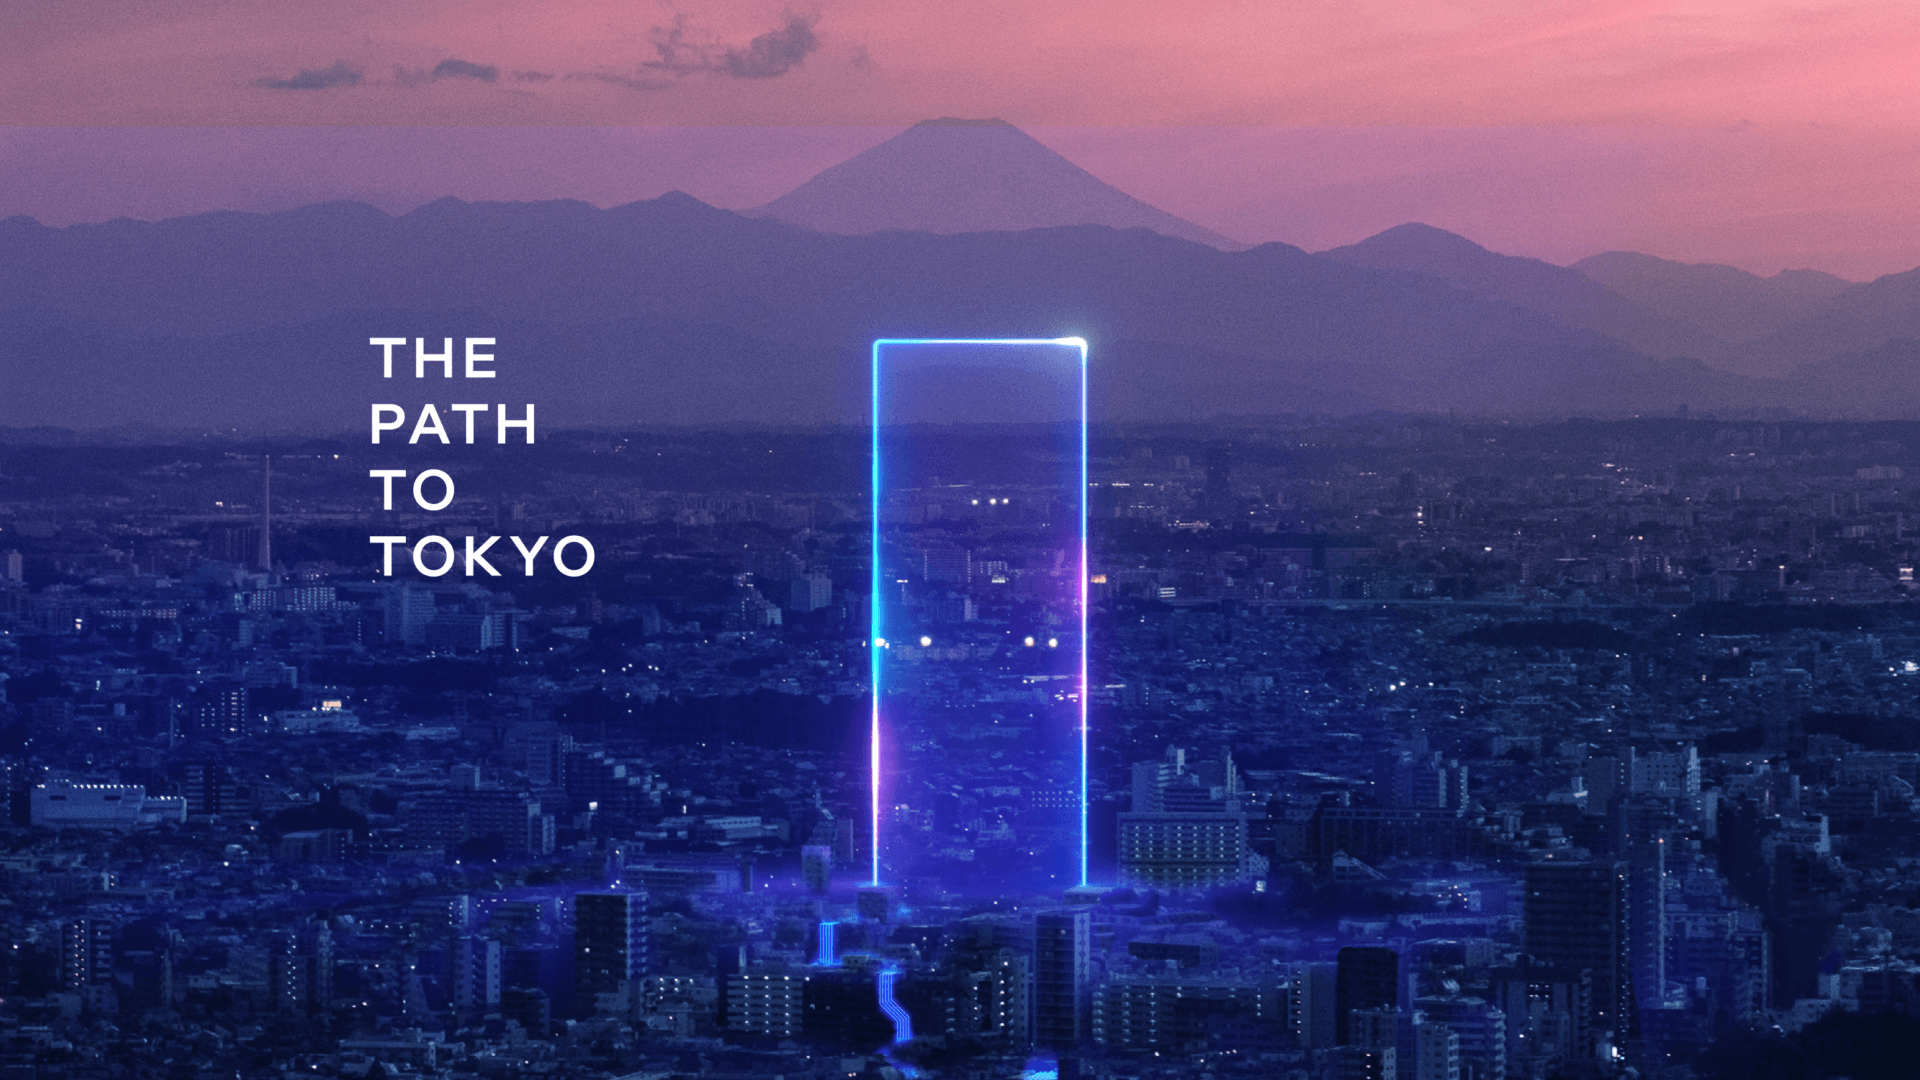 Intel World Open a Collaboration With the Tokyo 2020 Olympic Games